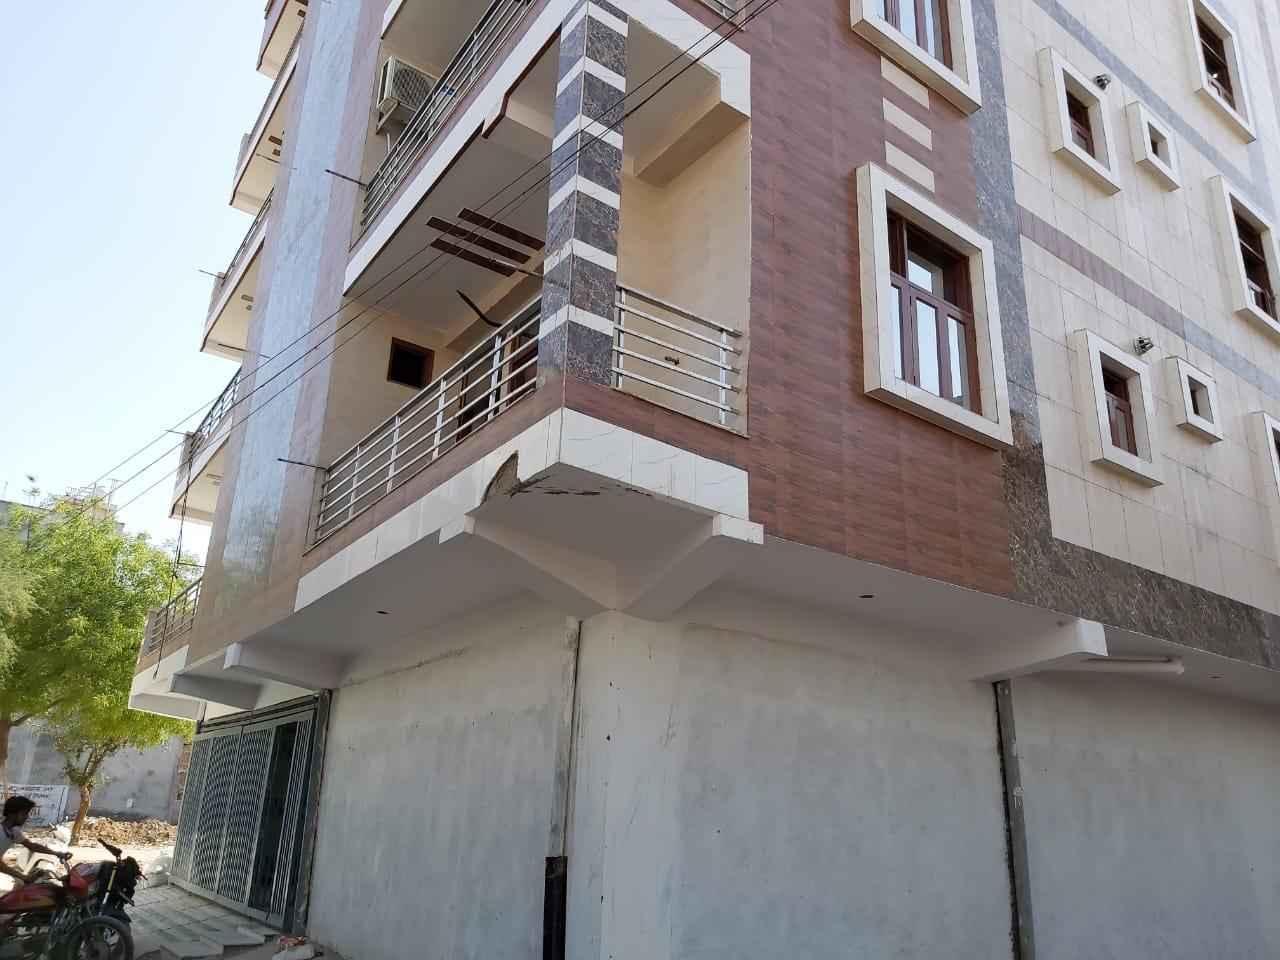 3 Bed/ 2 Bath Rent Apartment/ Flat; 100 sq. ft. carpet area, Furnished for rent @Ganga society 